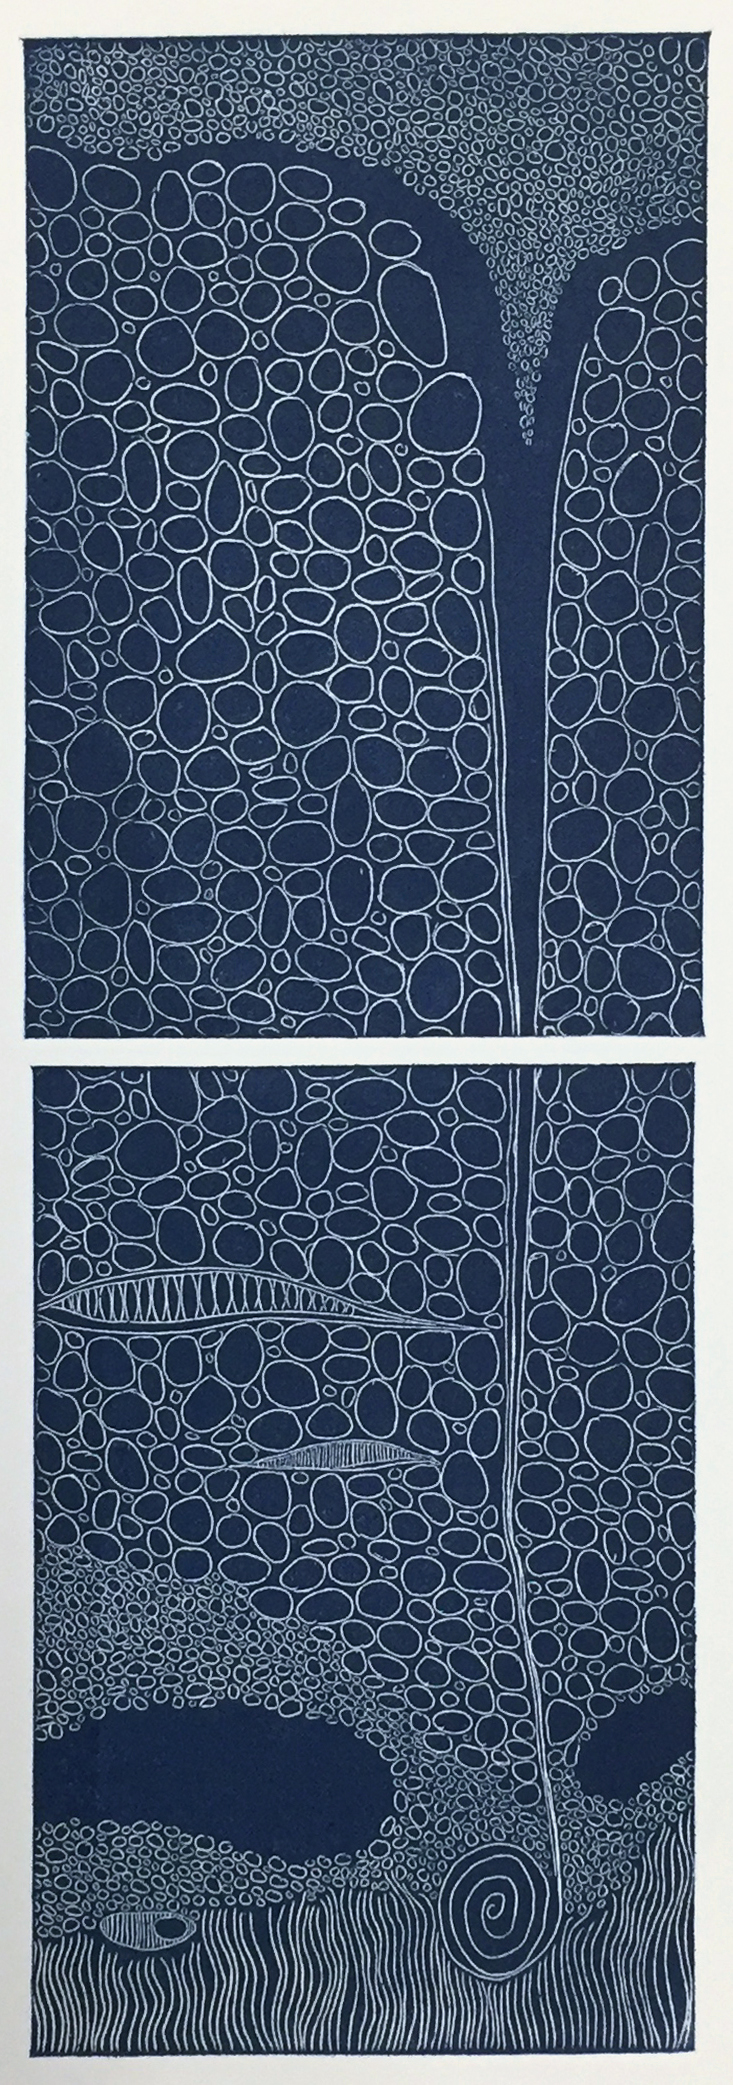  Shanti Conlan, Blue Abyss, Etching, Relief Printed, 12 x 4 in. 